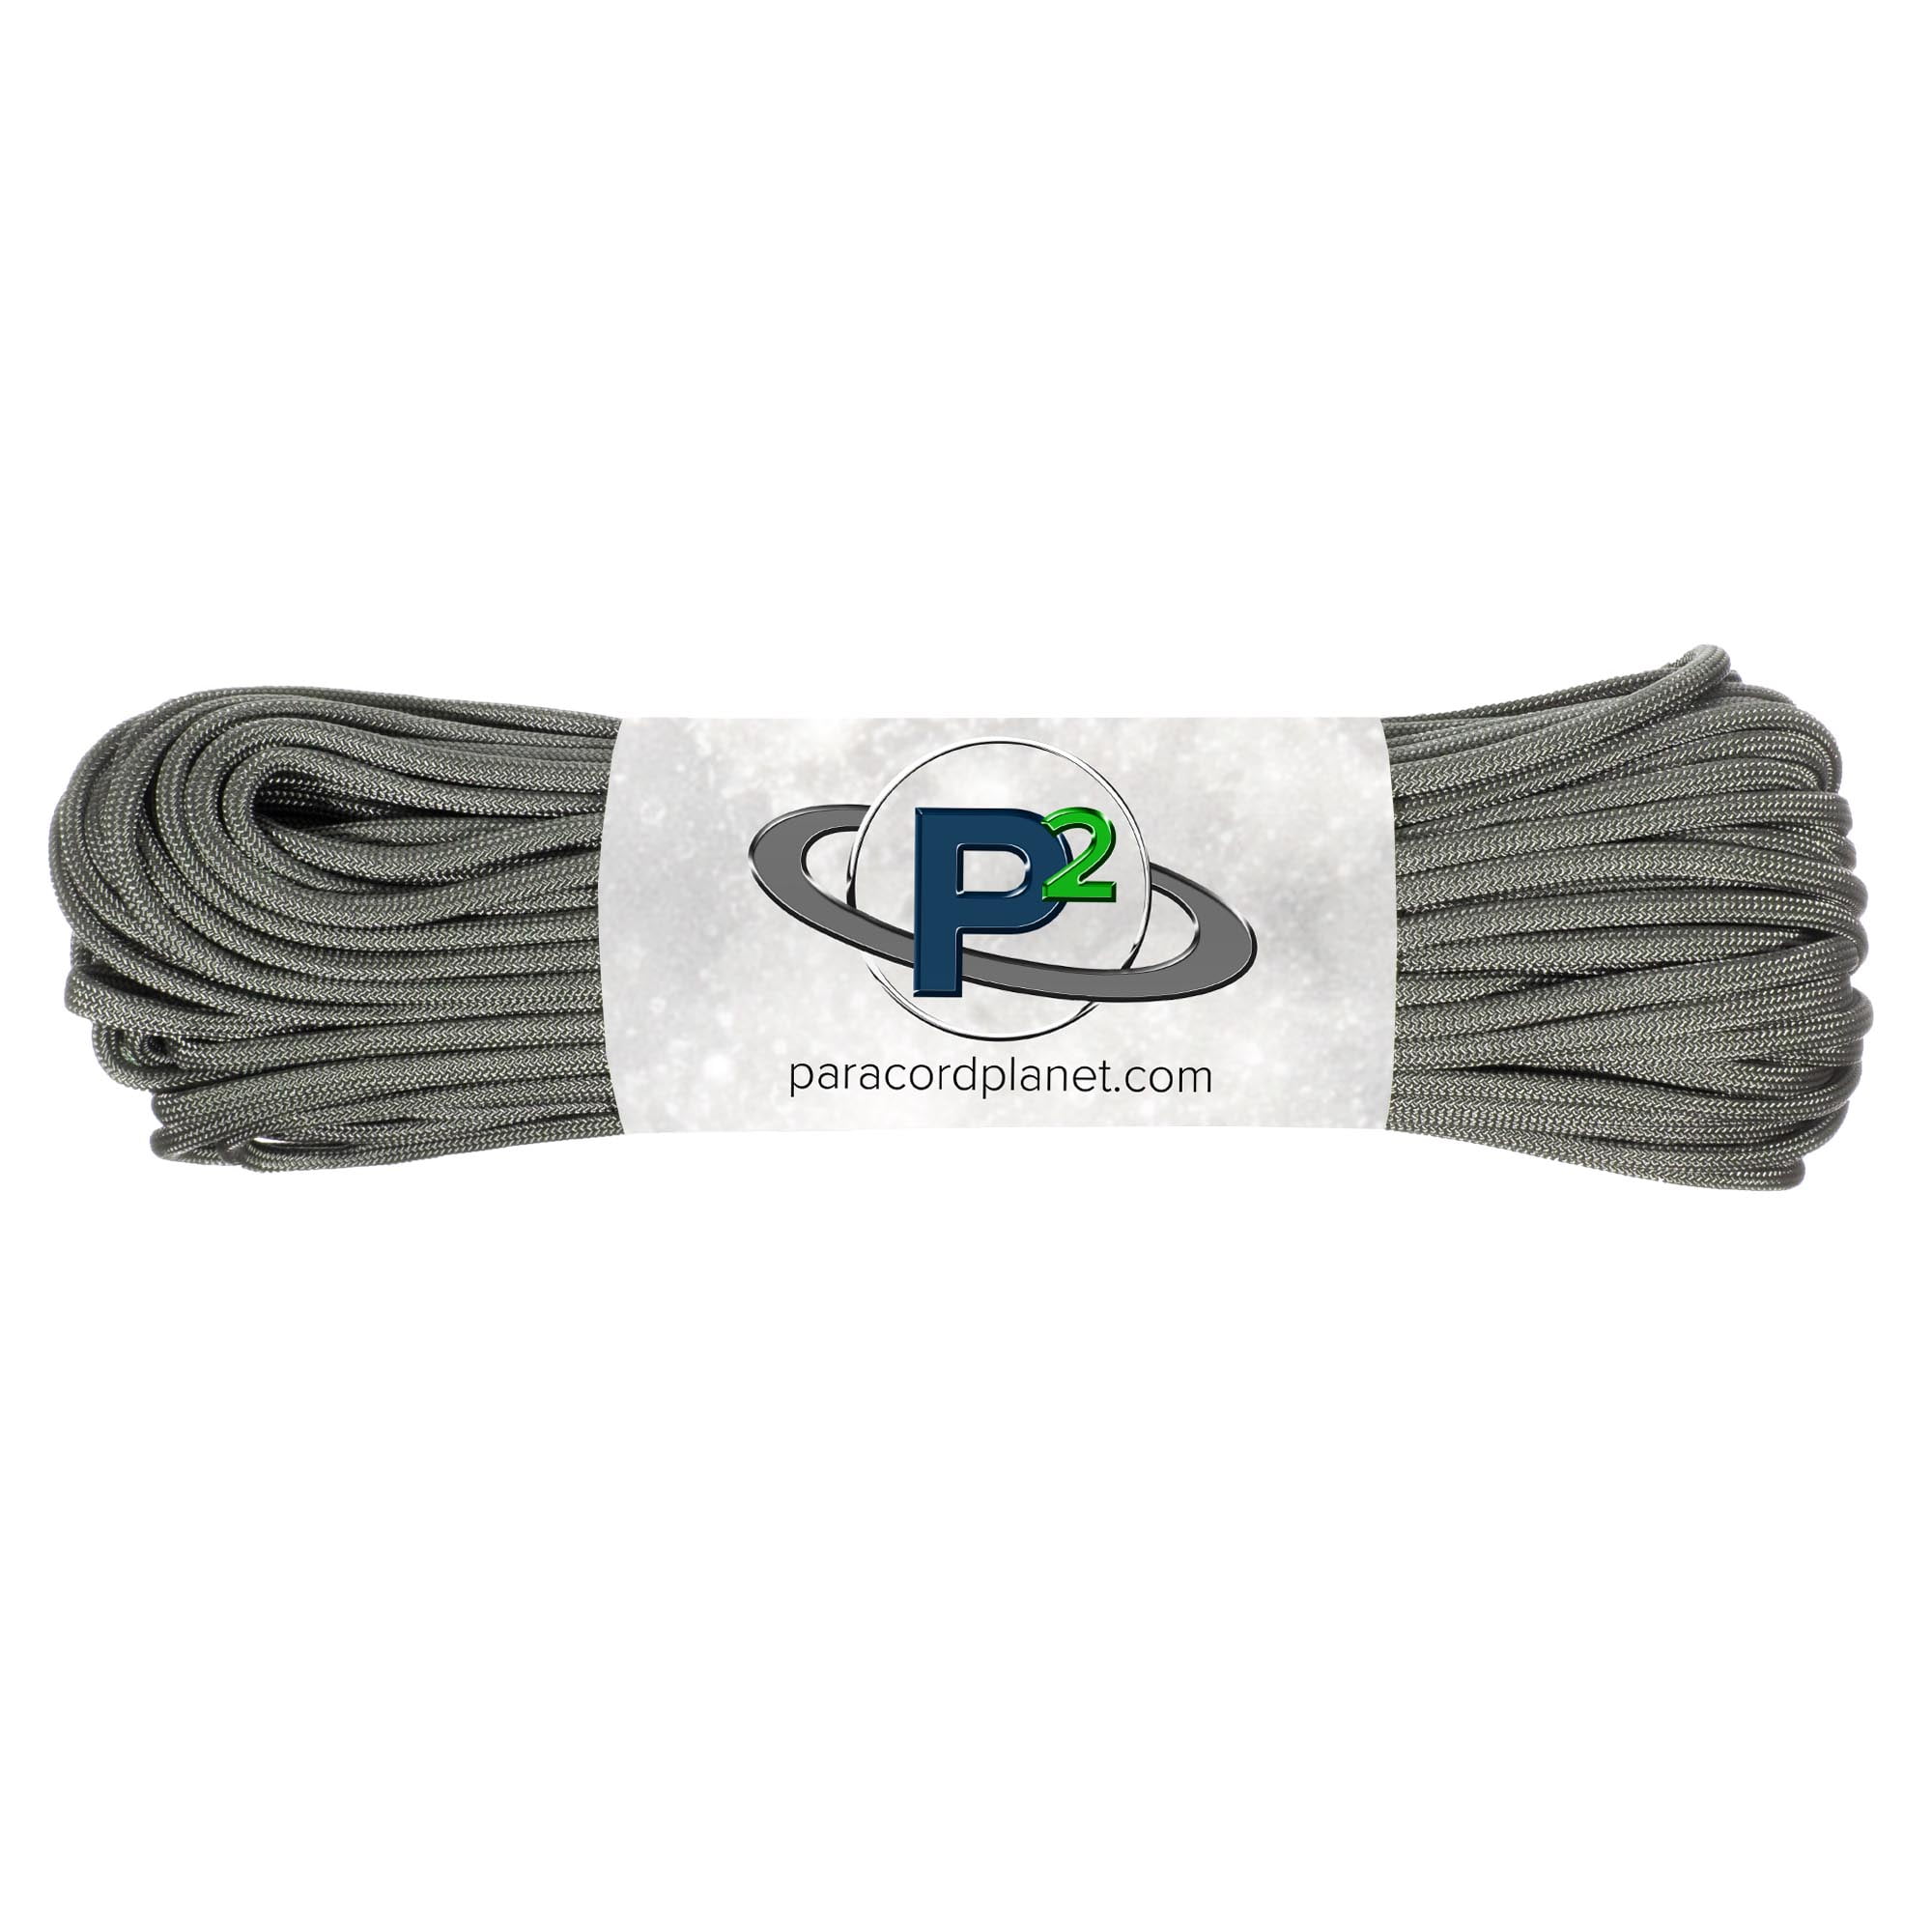 US Ropes Type III Commercial 550 Paracord 100' Hand Made in USA Survival Cord Parachute Outdoor 